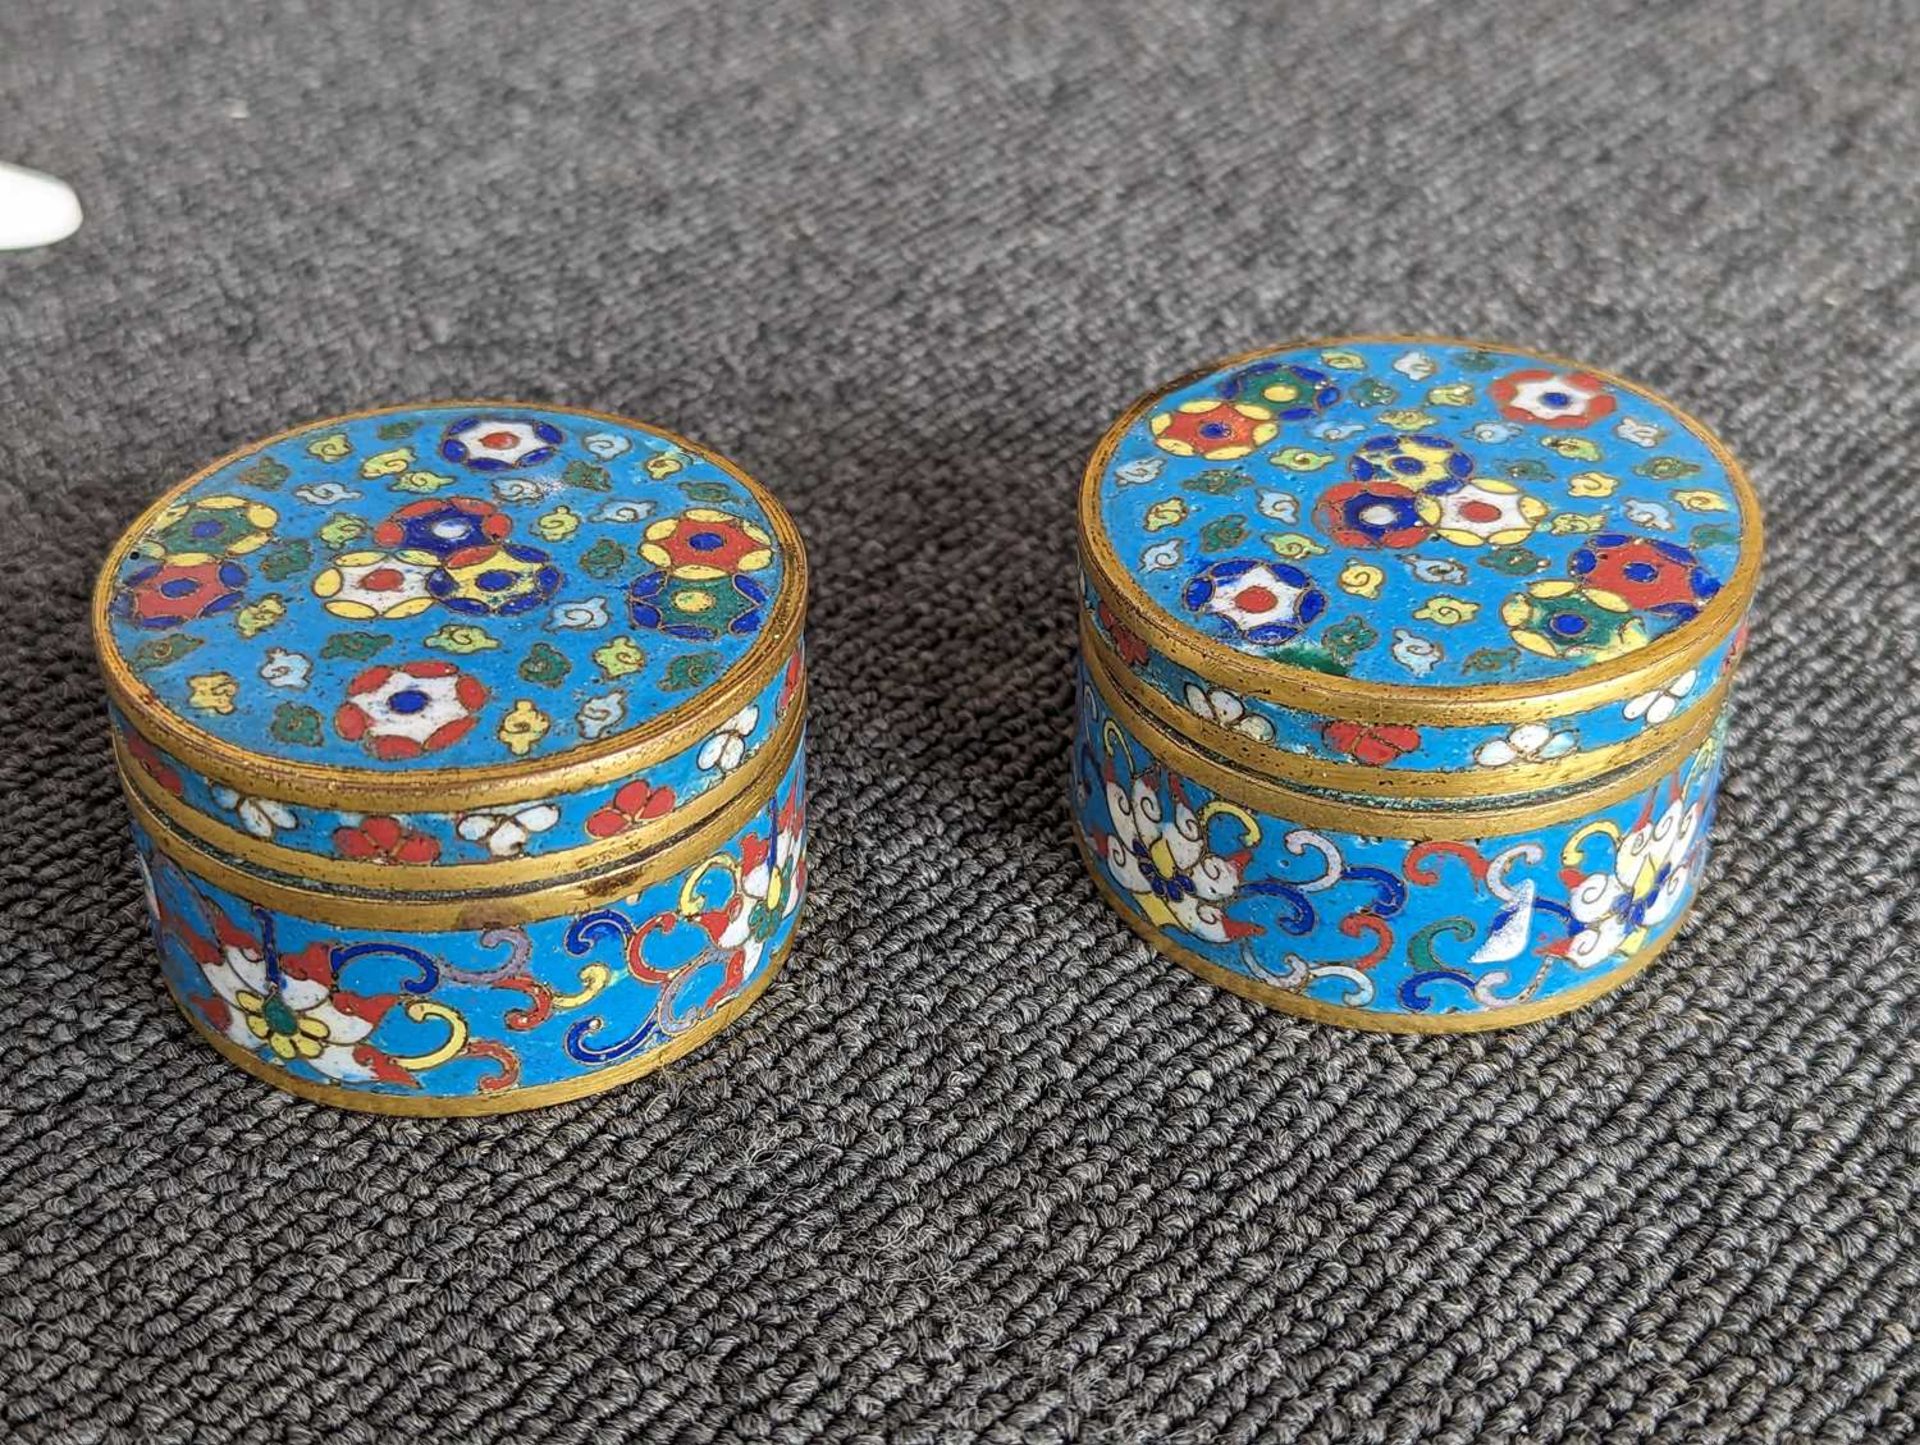 SET OF CLOISONNE BOXES - Image 5 of 15